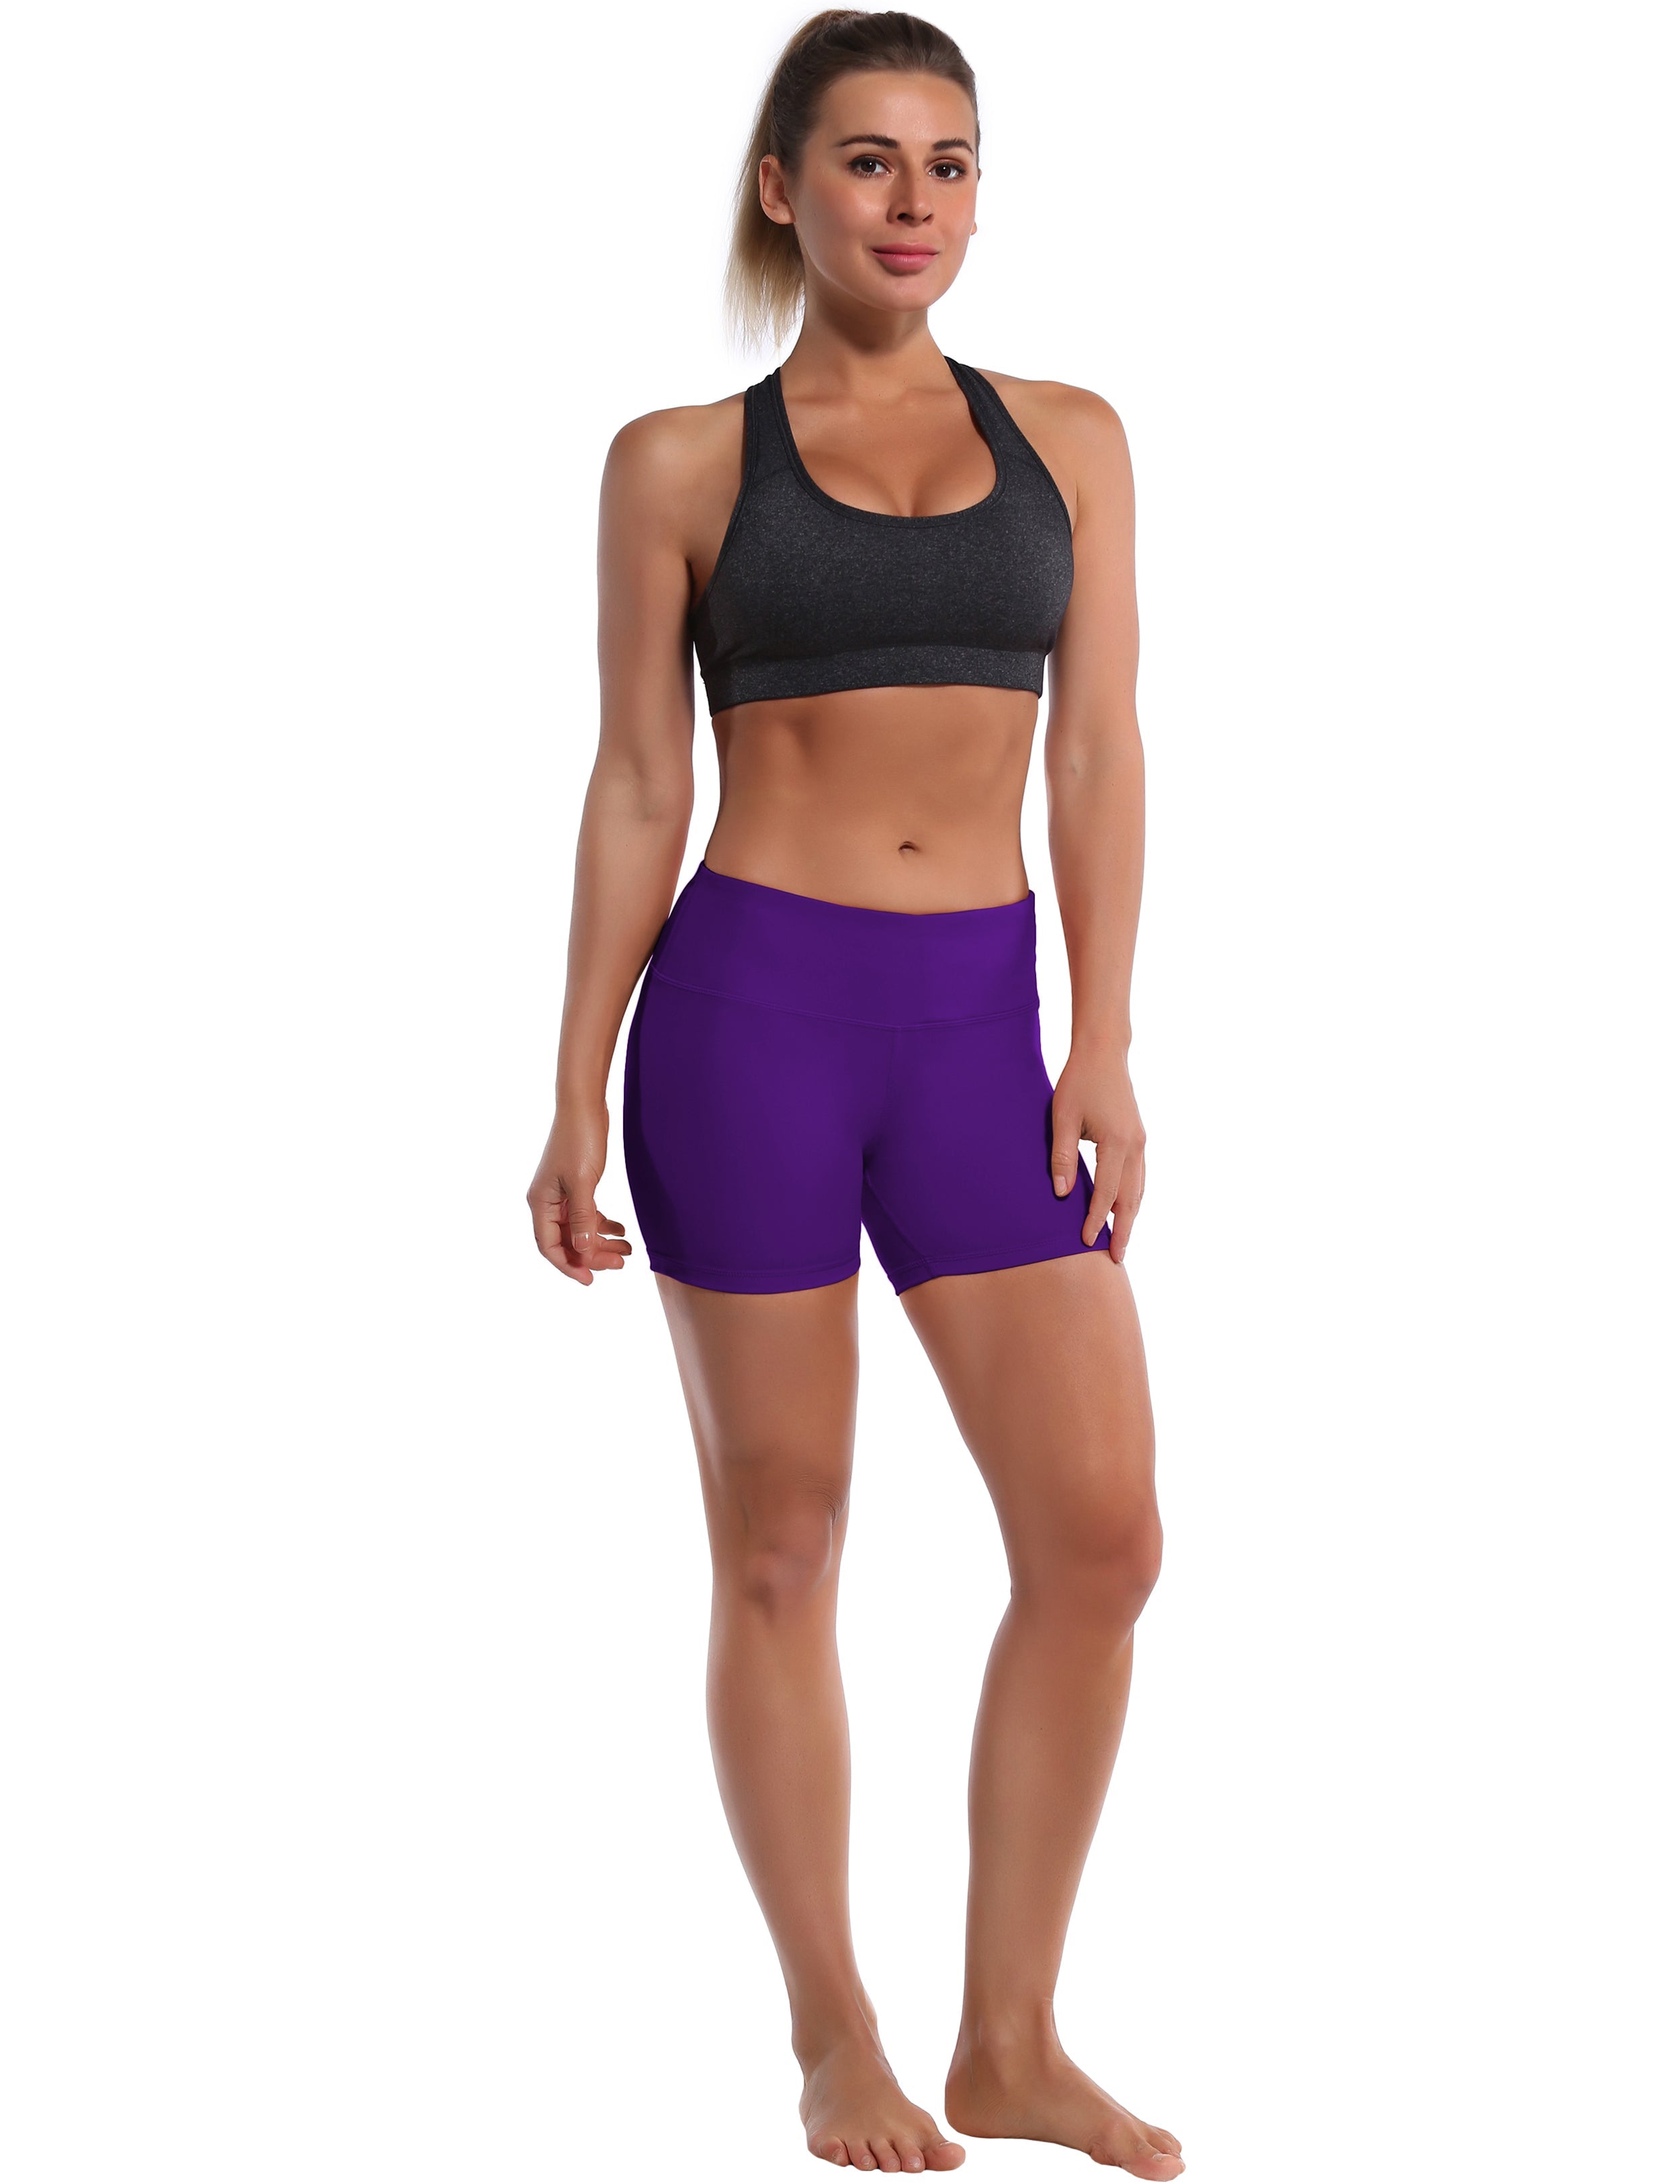 4" Jogging Shorts eggplantpurple Sleek, soft, smooth and totally comfortable: our newest style is here. Softest-ever fabric High elasticity High density 4-way stretch Fabric doesn't attract lint easily No see-through Moisture-wicking Machine wash 75% Nylon, 25% Spandex